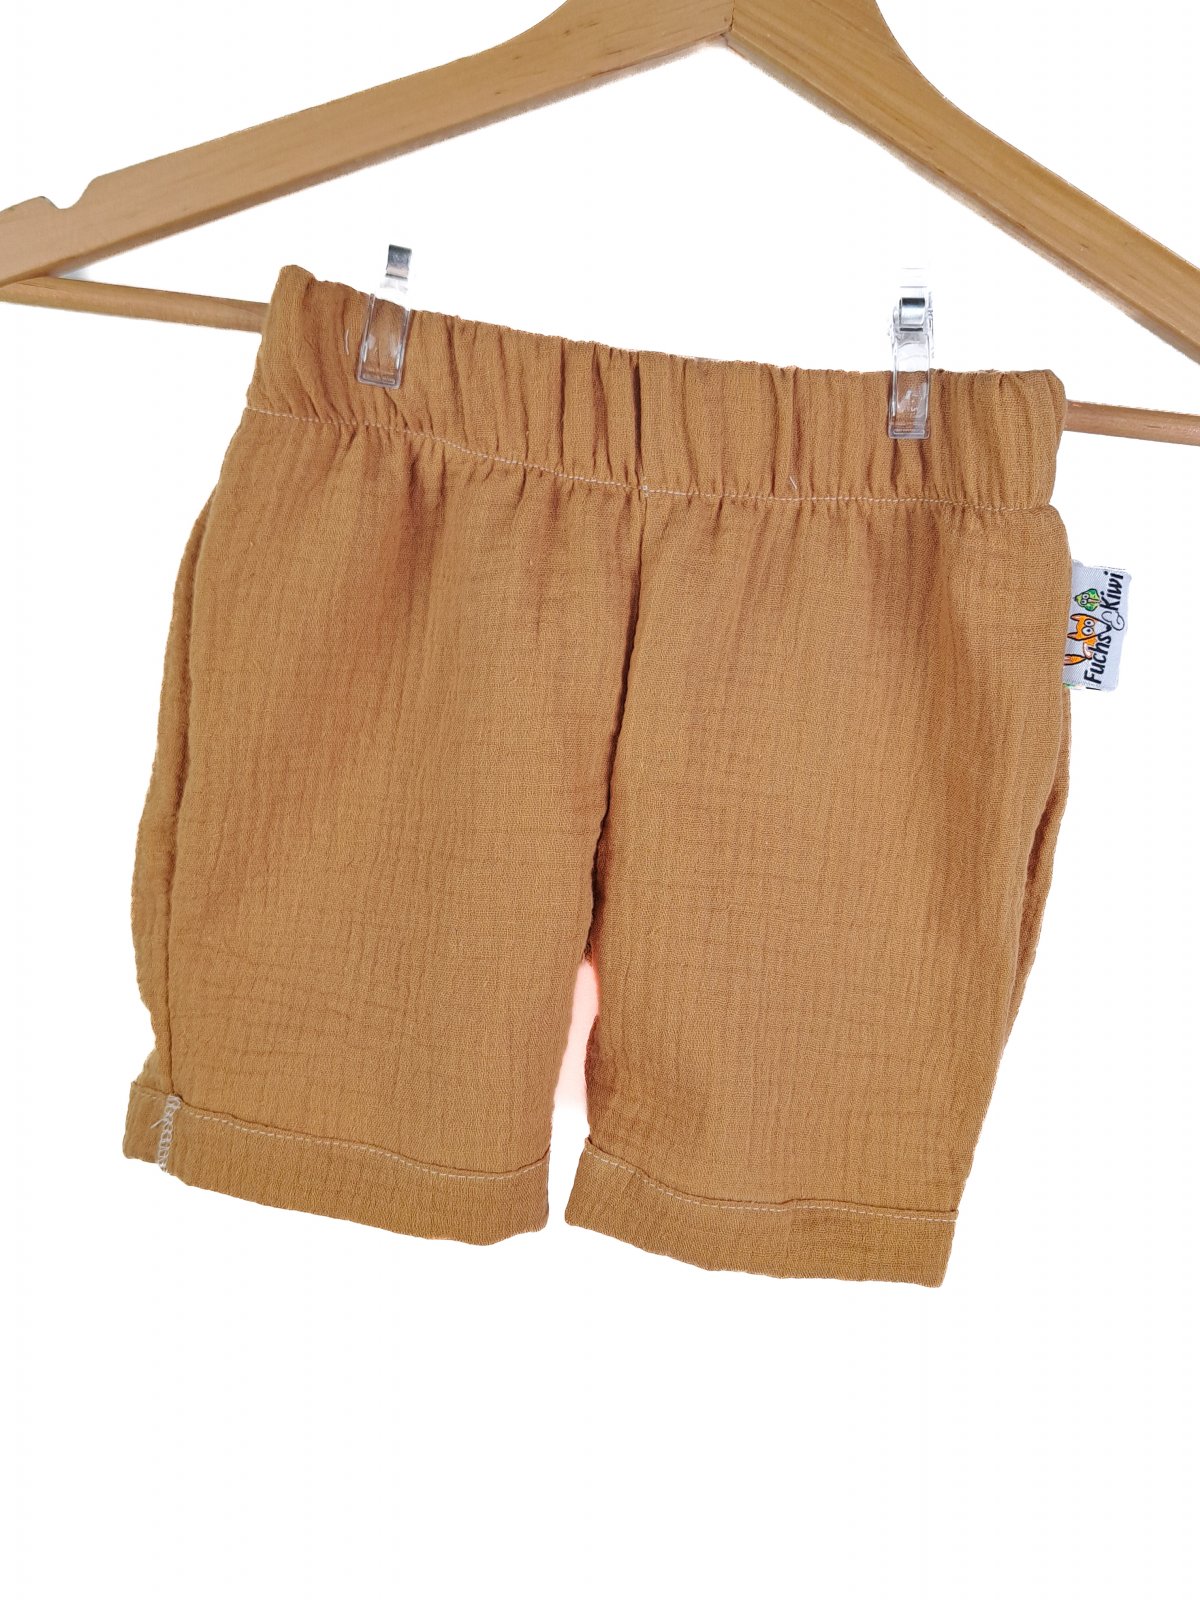 Musselin Leo sand Outfit